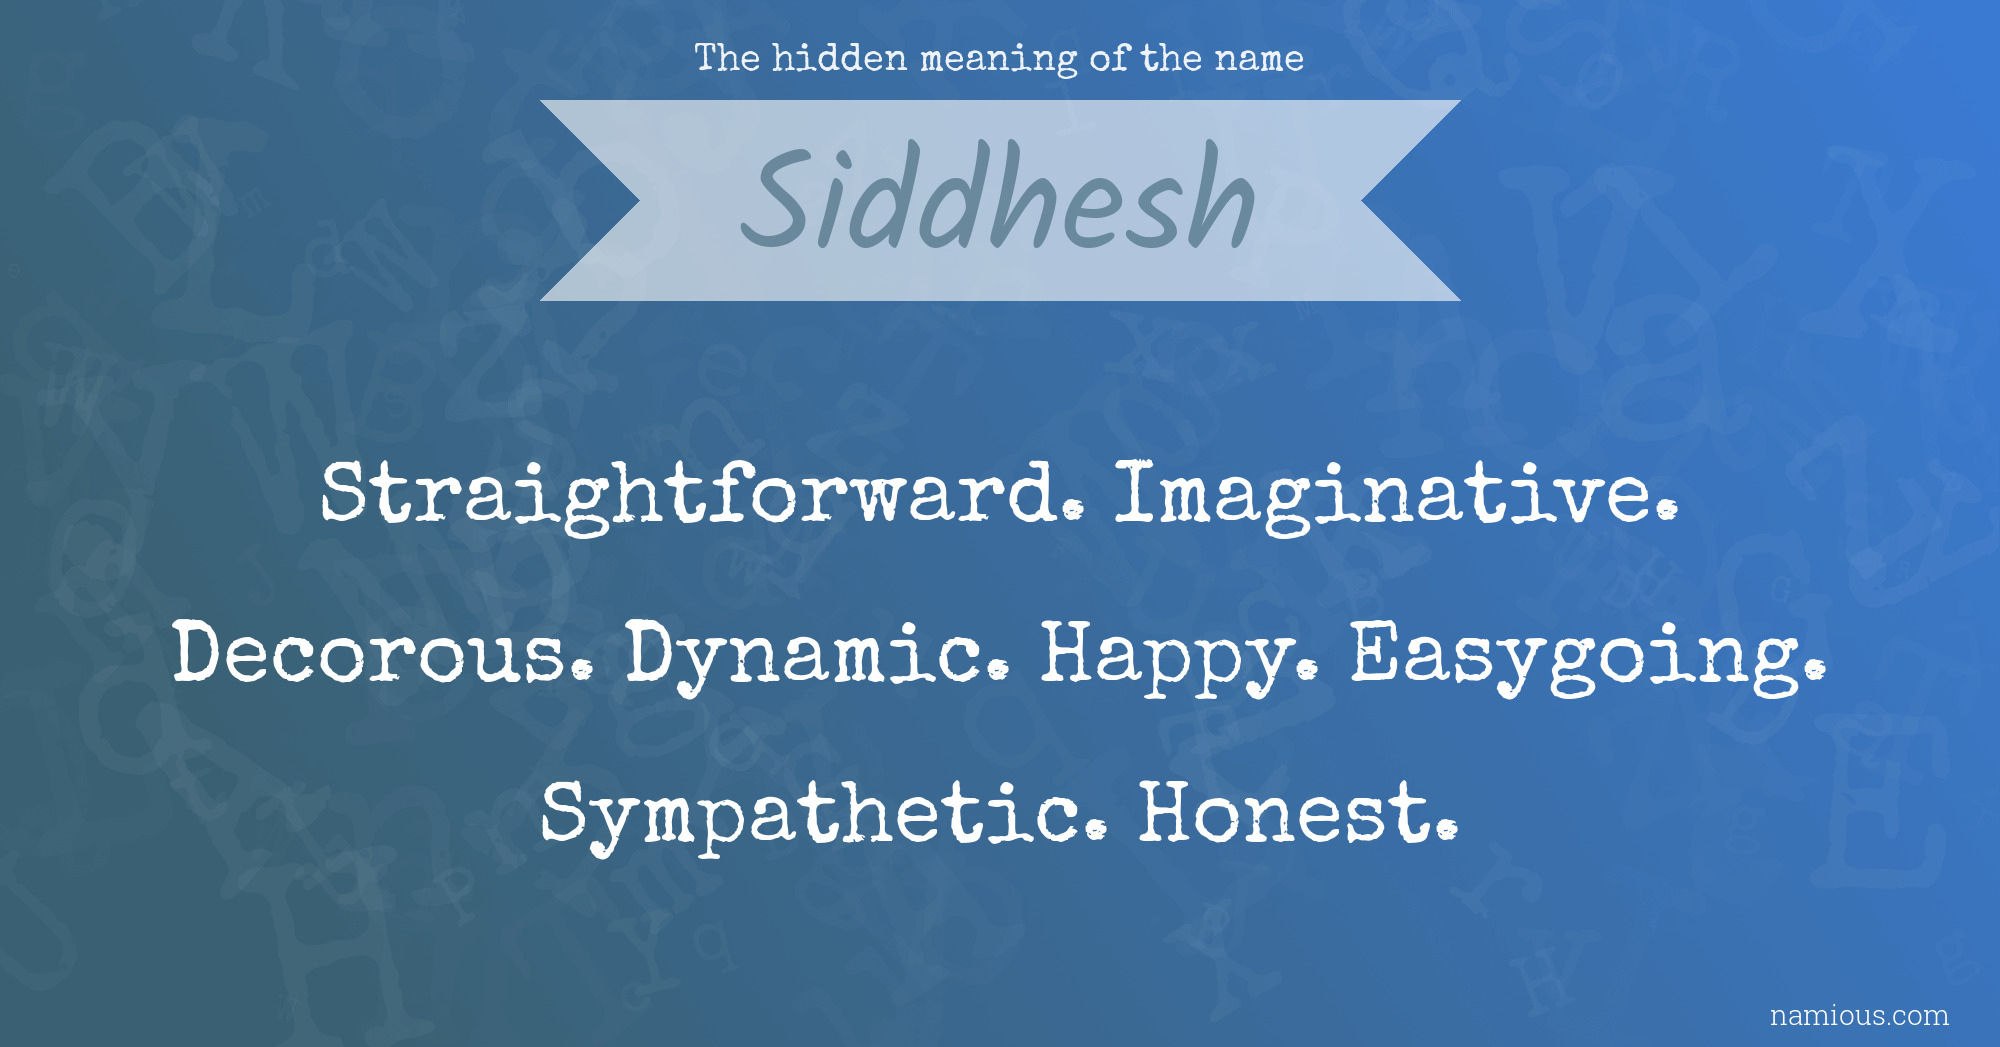 The hidden meaning of the name Siddhesh